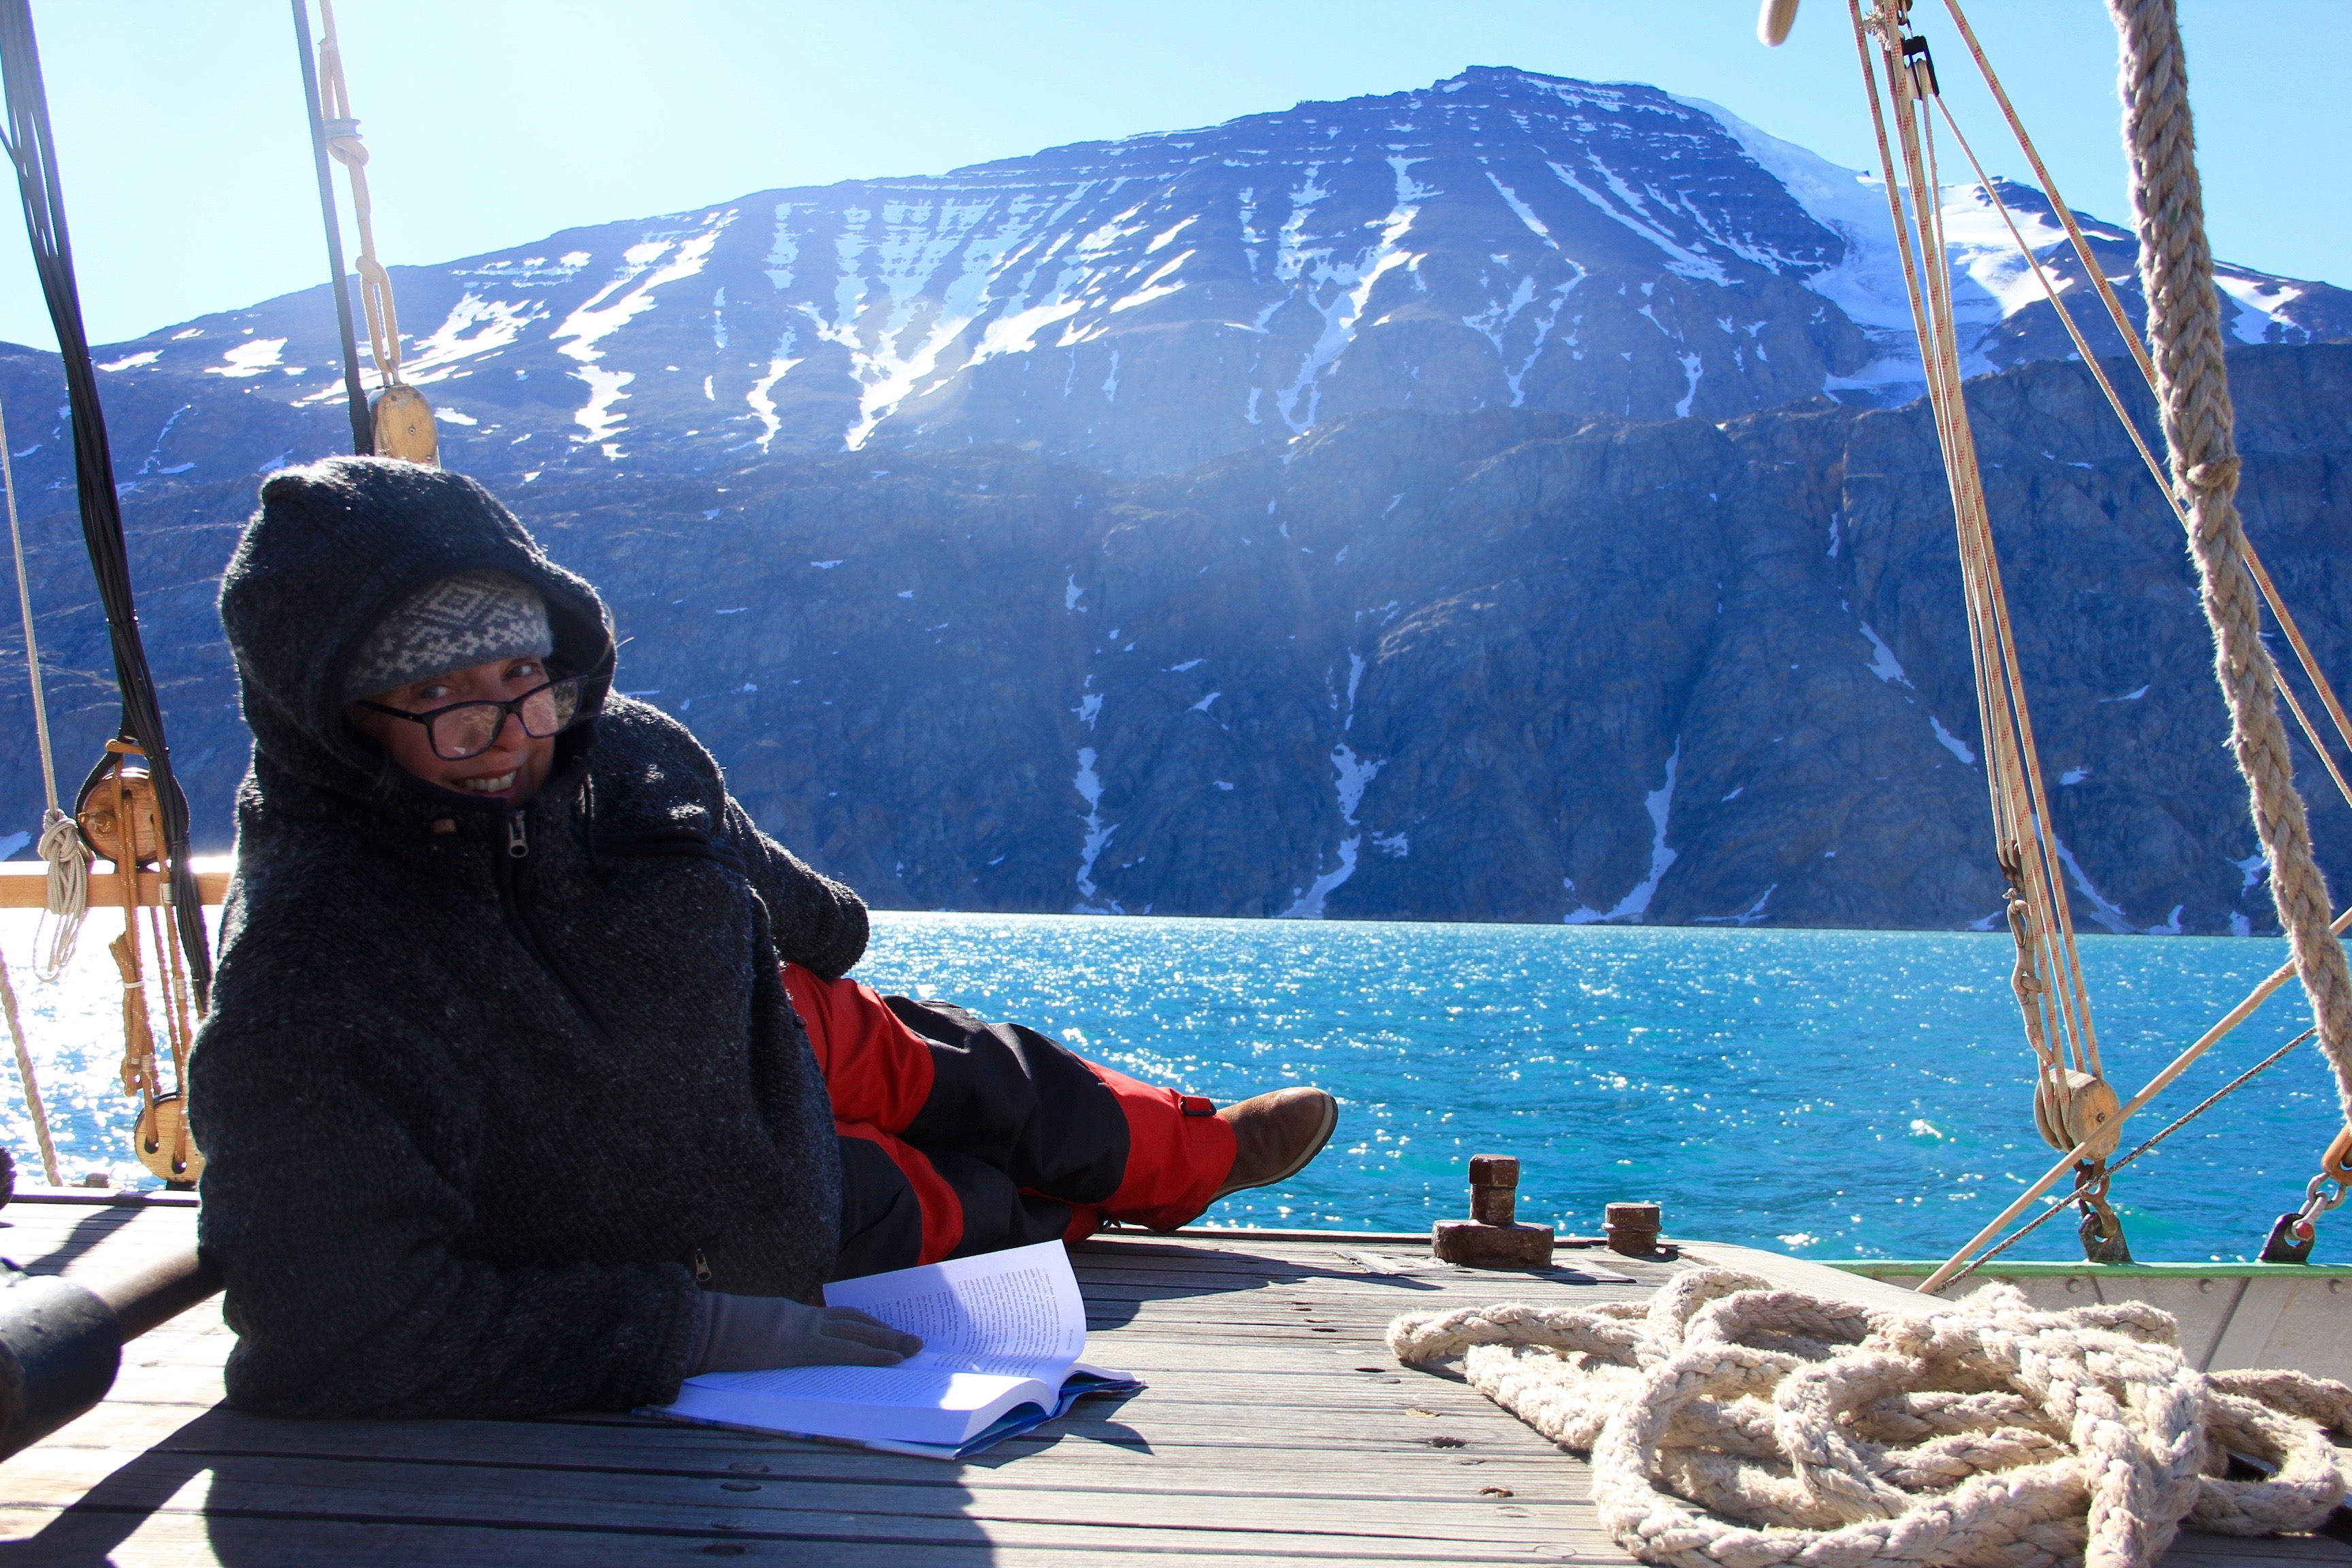 Clothing in Greenland is tricky. It can range from baking sun to chilly